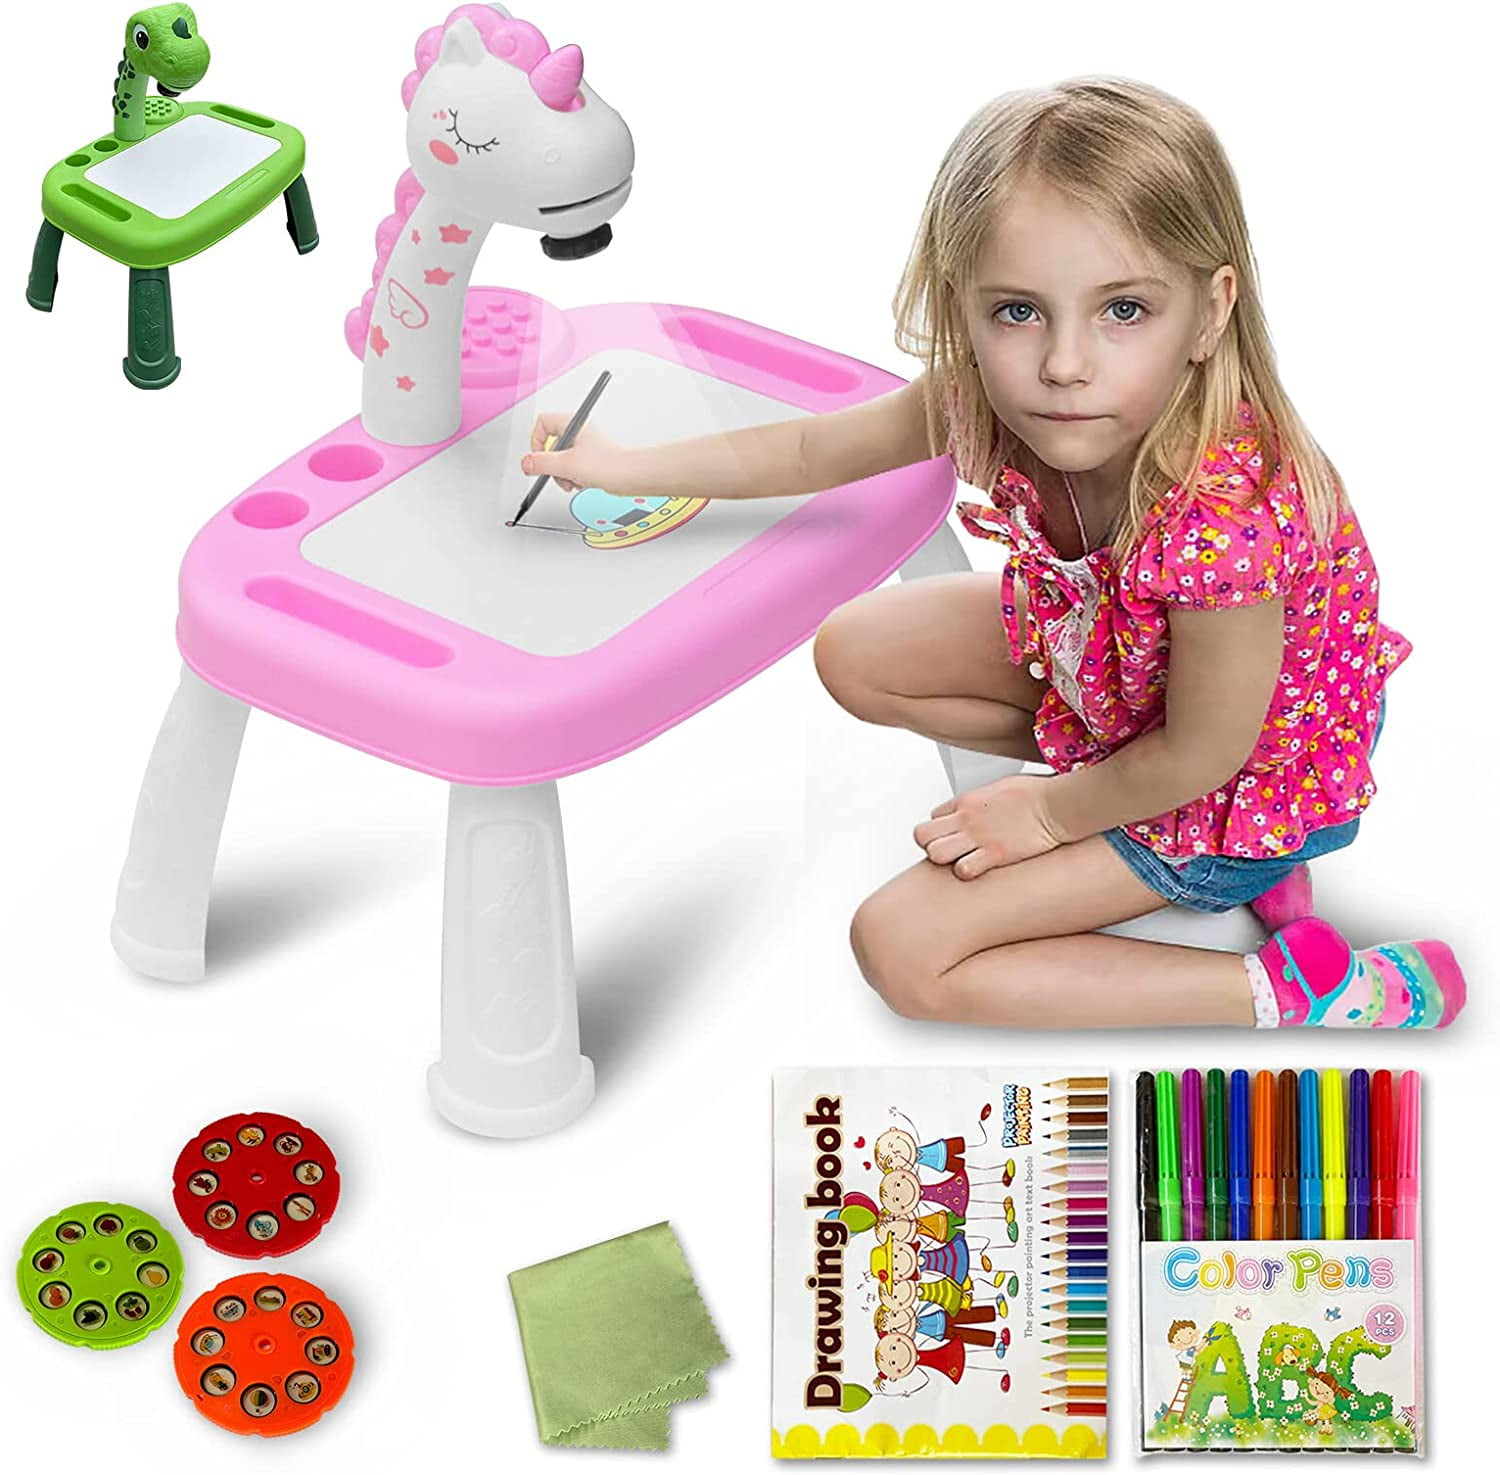 Kids Drawing and Tracing Projector Art Table – Stuffible